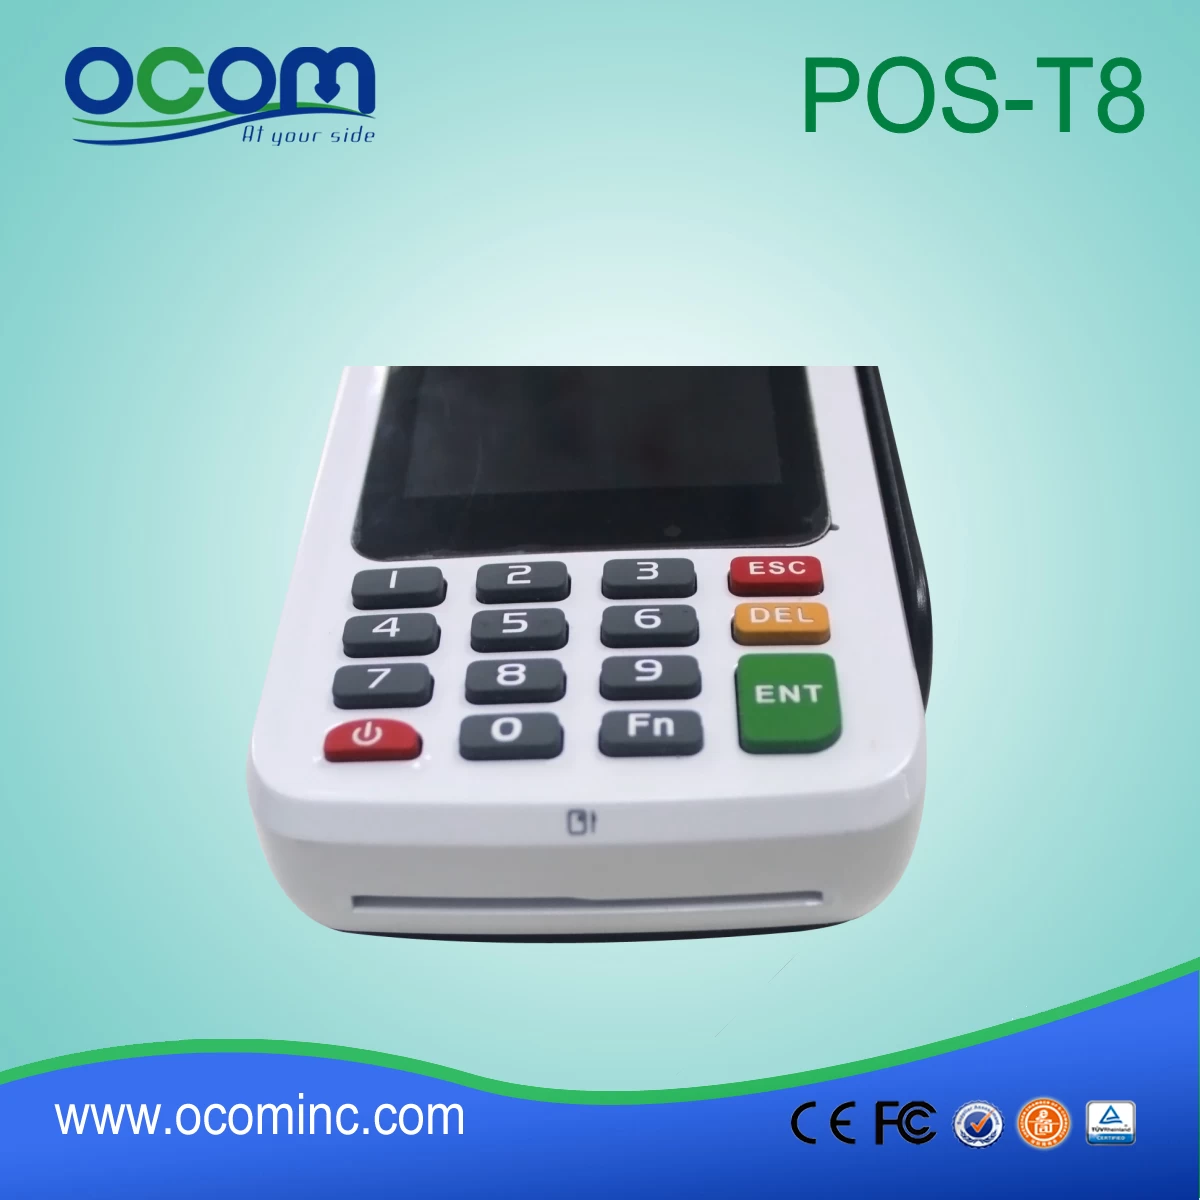 2016 Handheld Android POS Terminal with Payment Function (POS-T8)